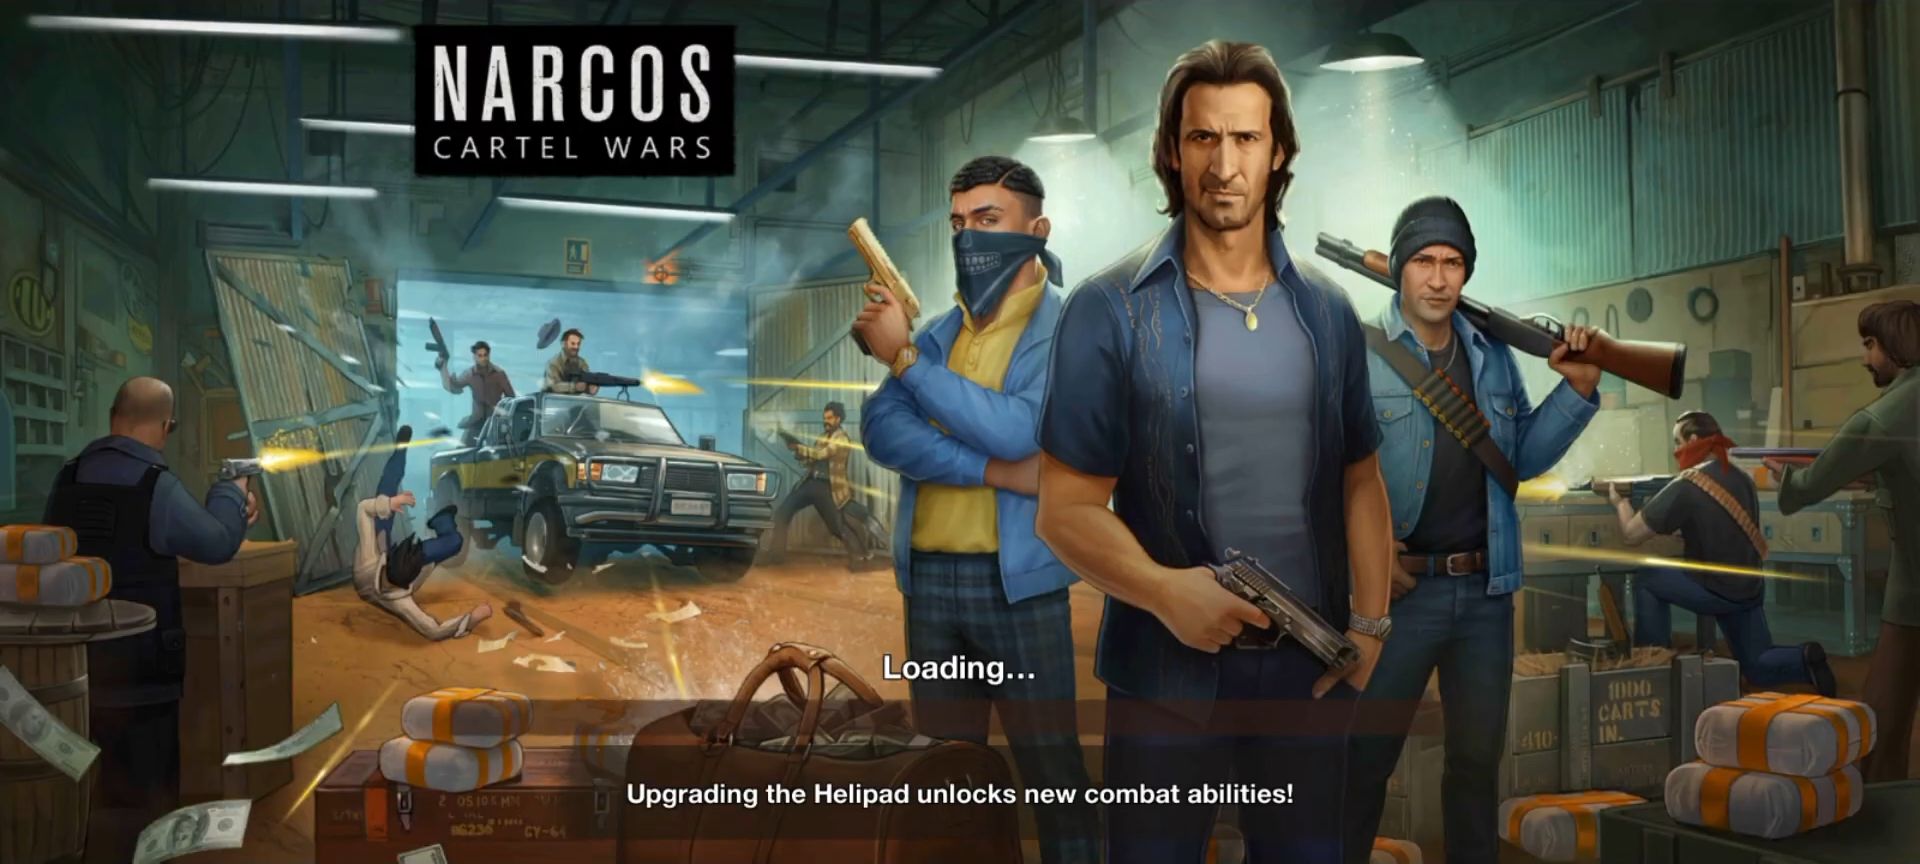 Download Narcos: Cartel Wars Unlimited Android free game.